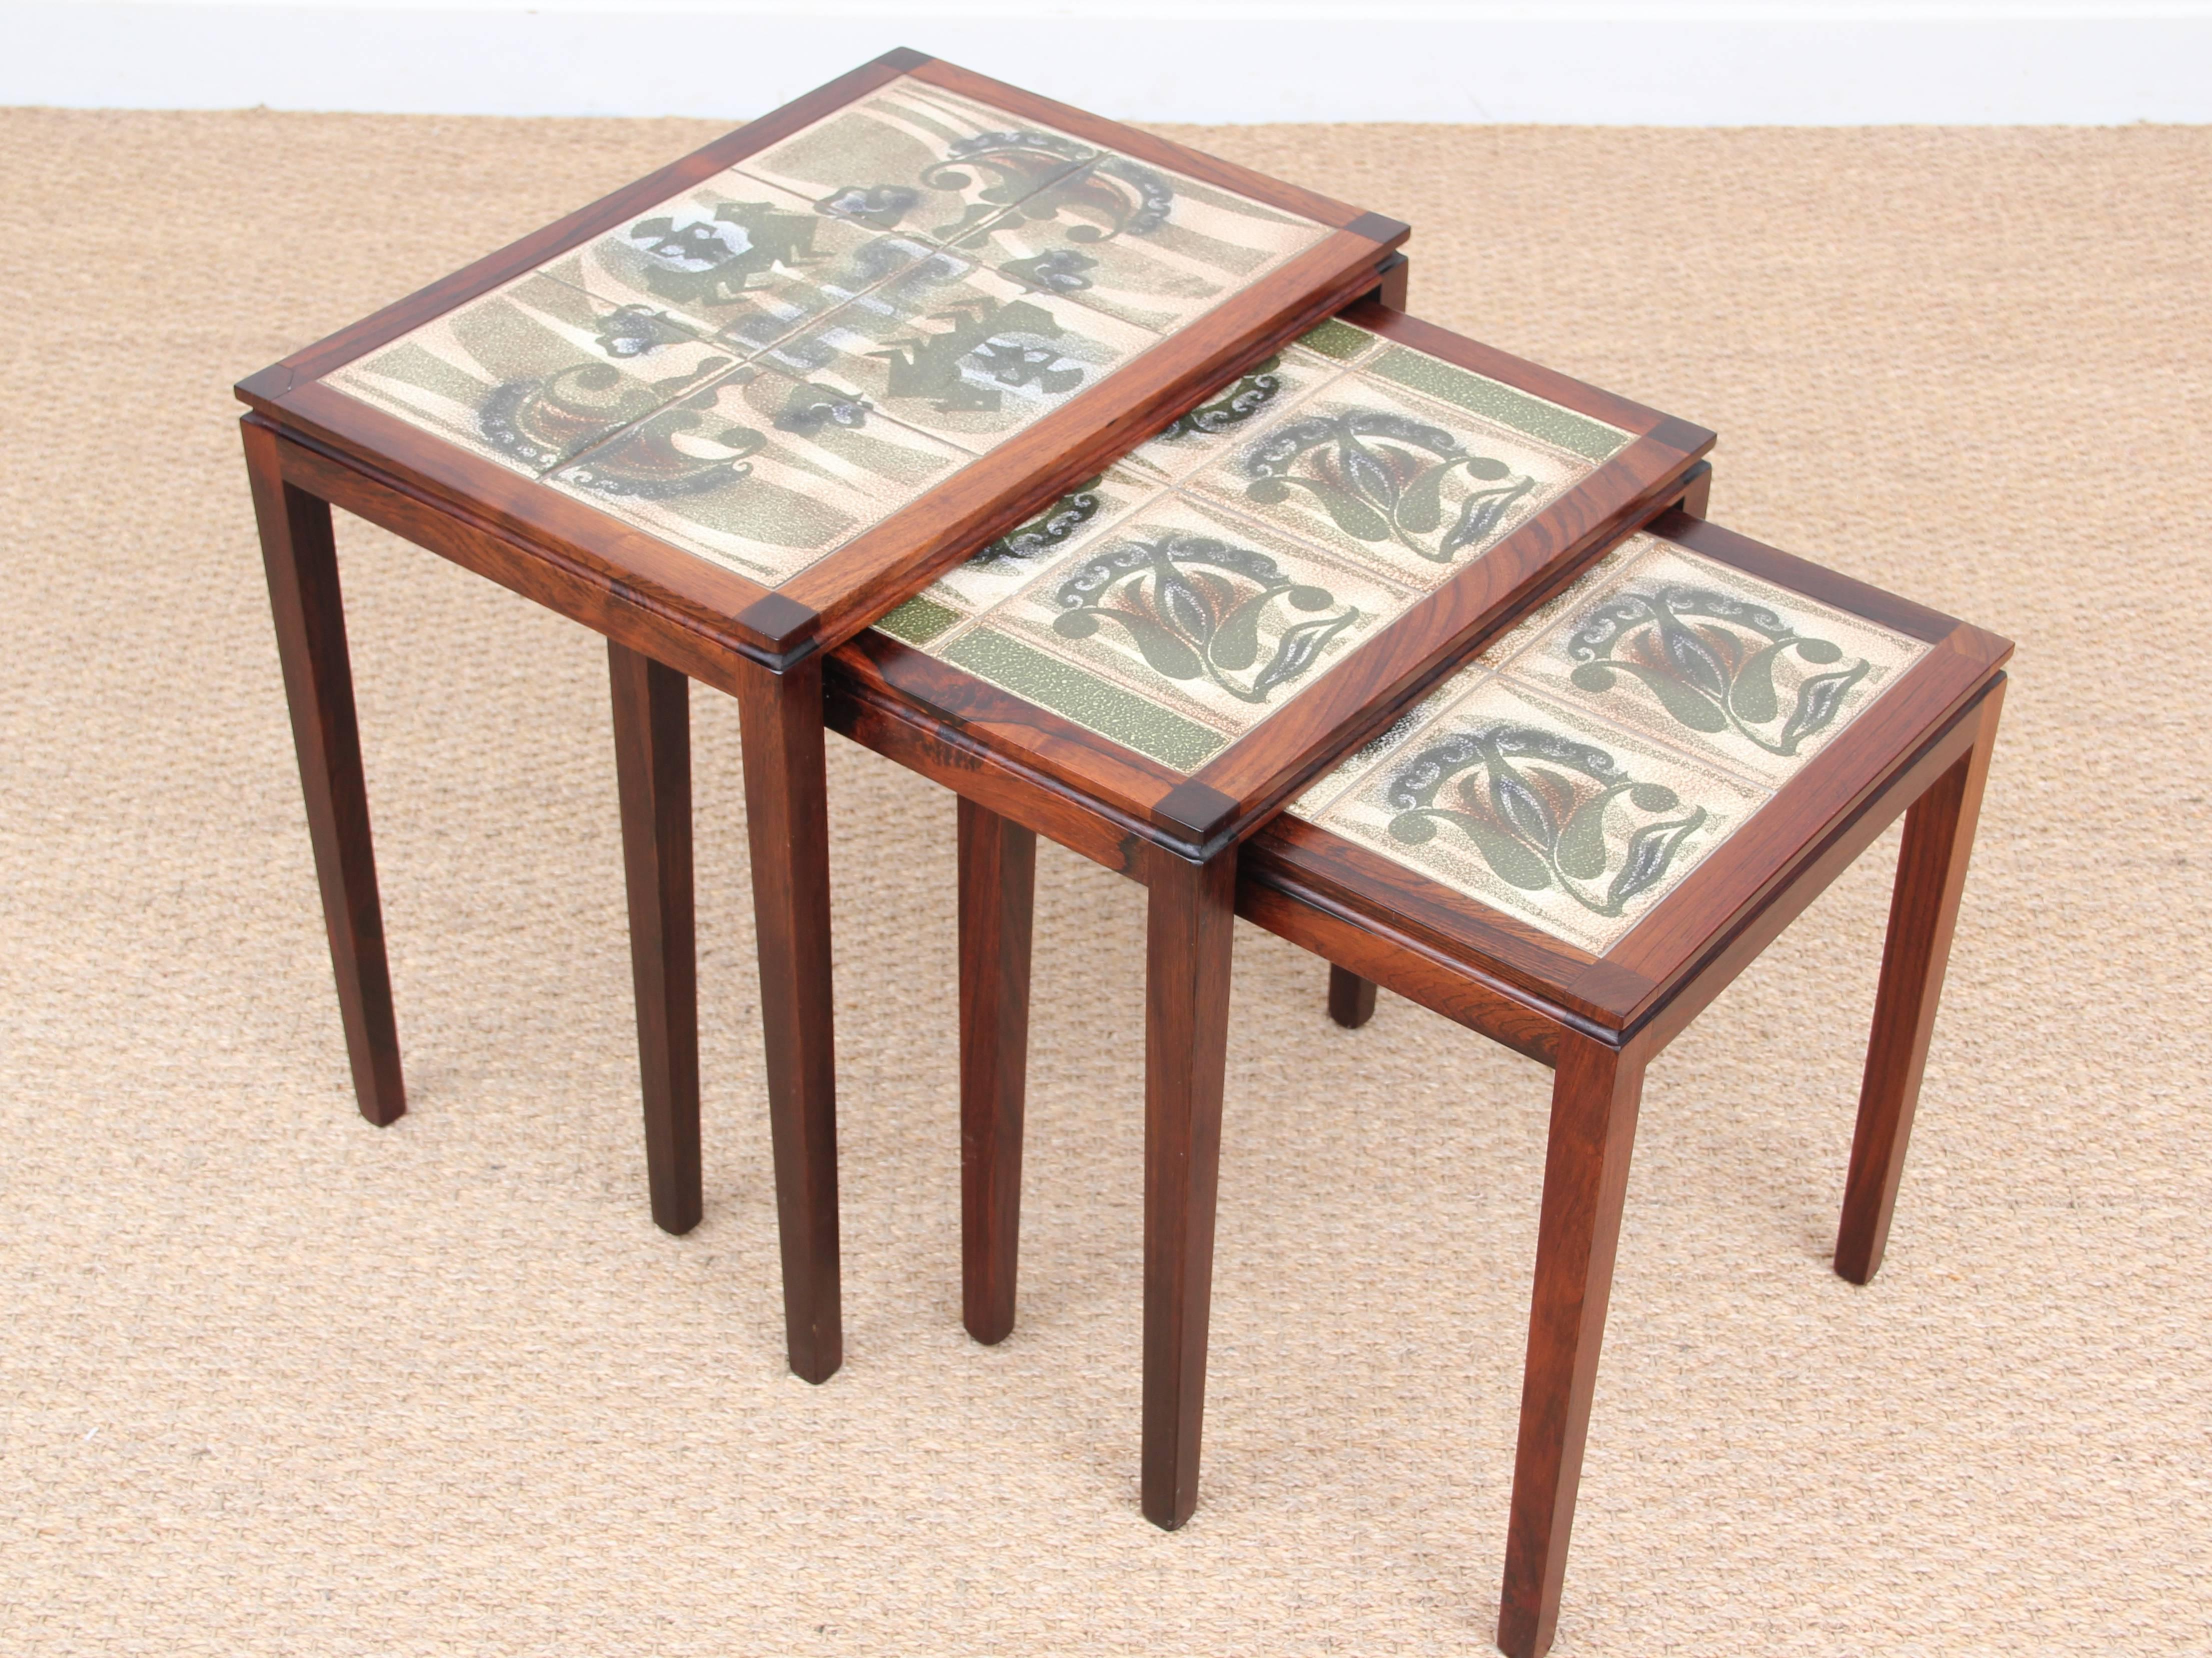 Mid-Century Modern Scandinavian nesting tables in Rio rosewood and ceramic tales.